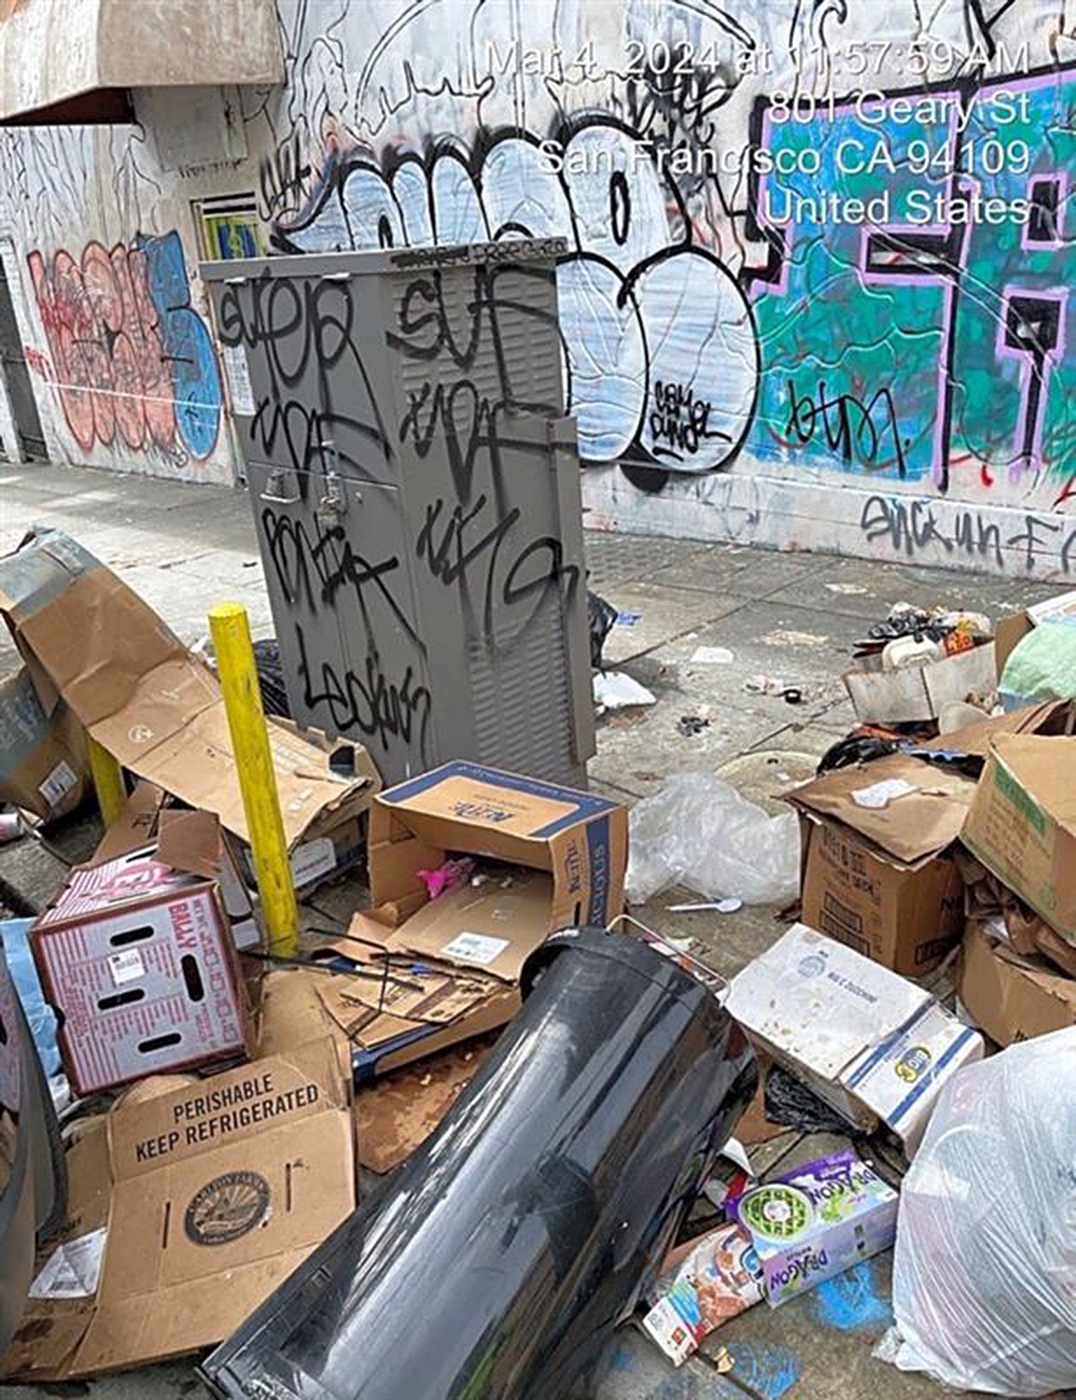 An alleyway littered with trash and boxes, with graffiti-covered walls and a utility box.